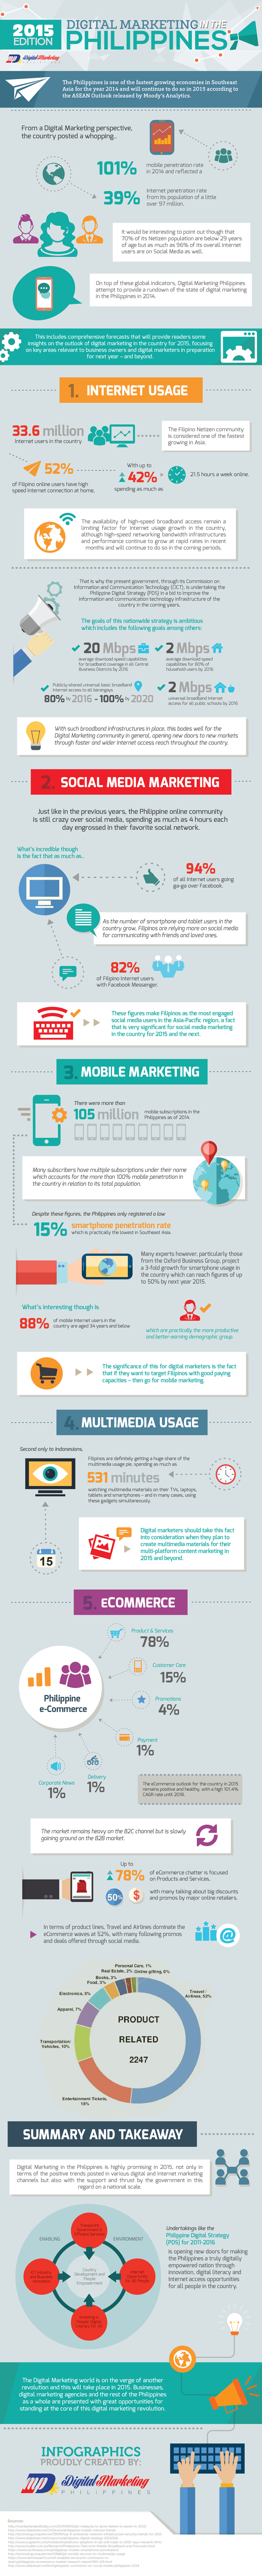 Digital-Marketing-in-the-Philippines---2015-Edition